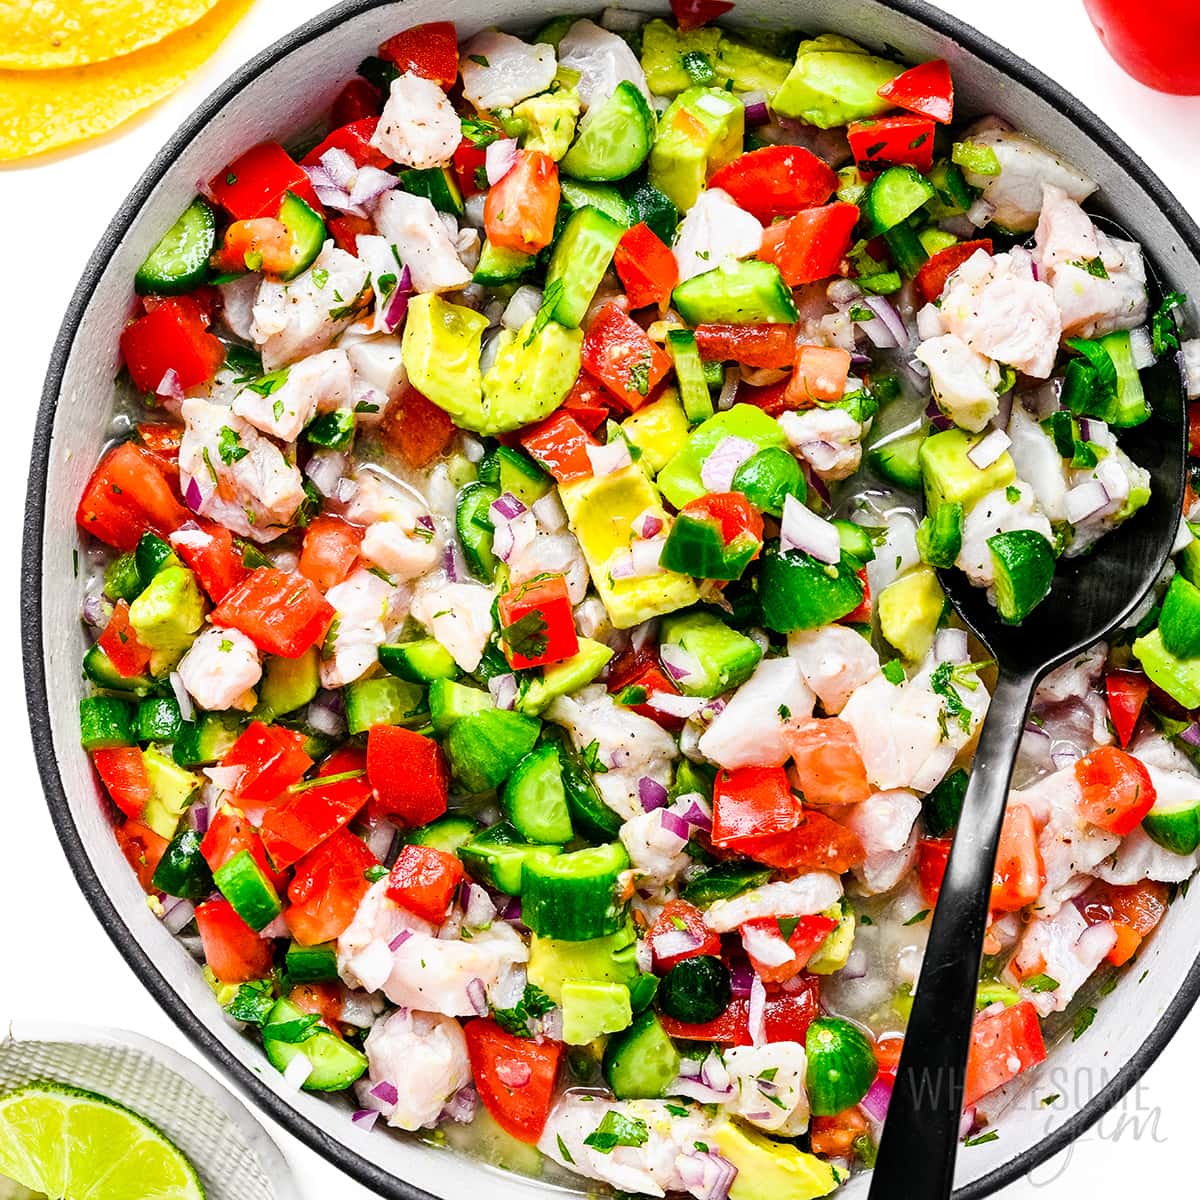 Ceviche recipe in a bowl with a spoon.